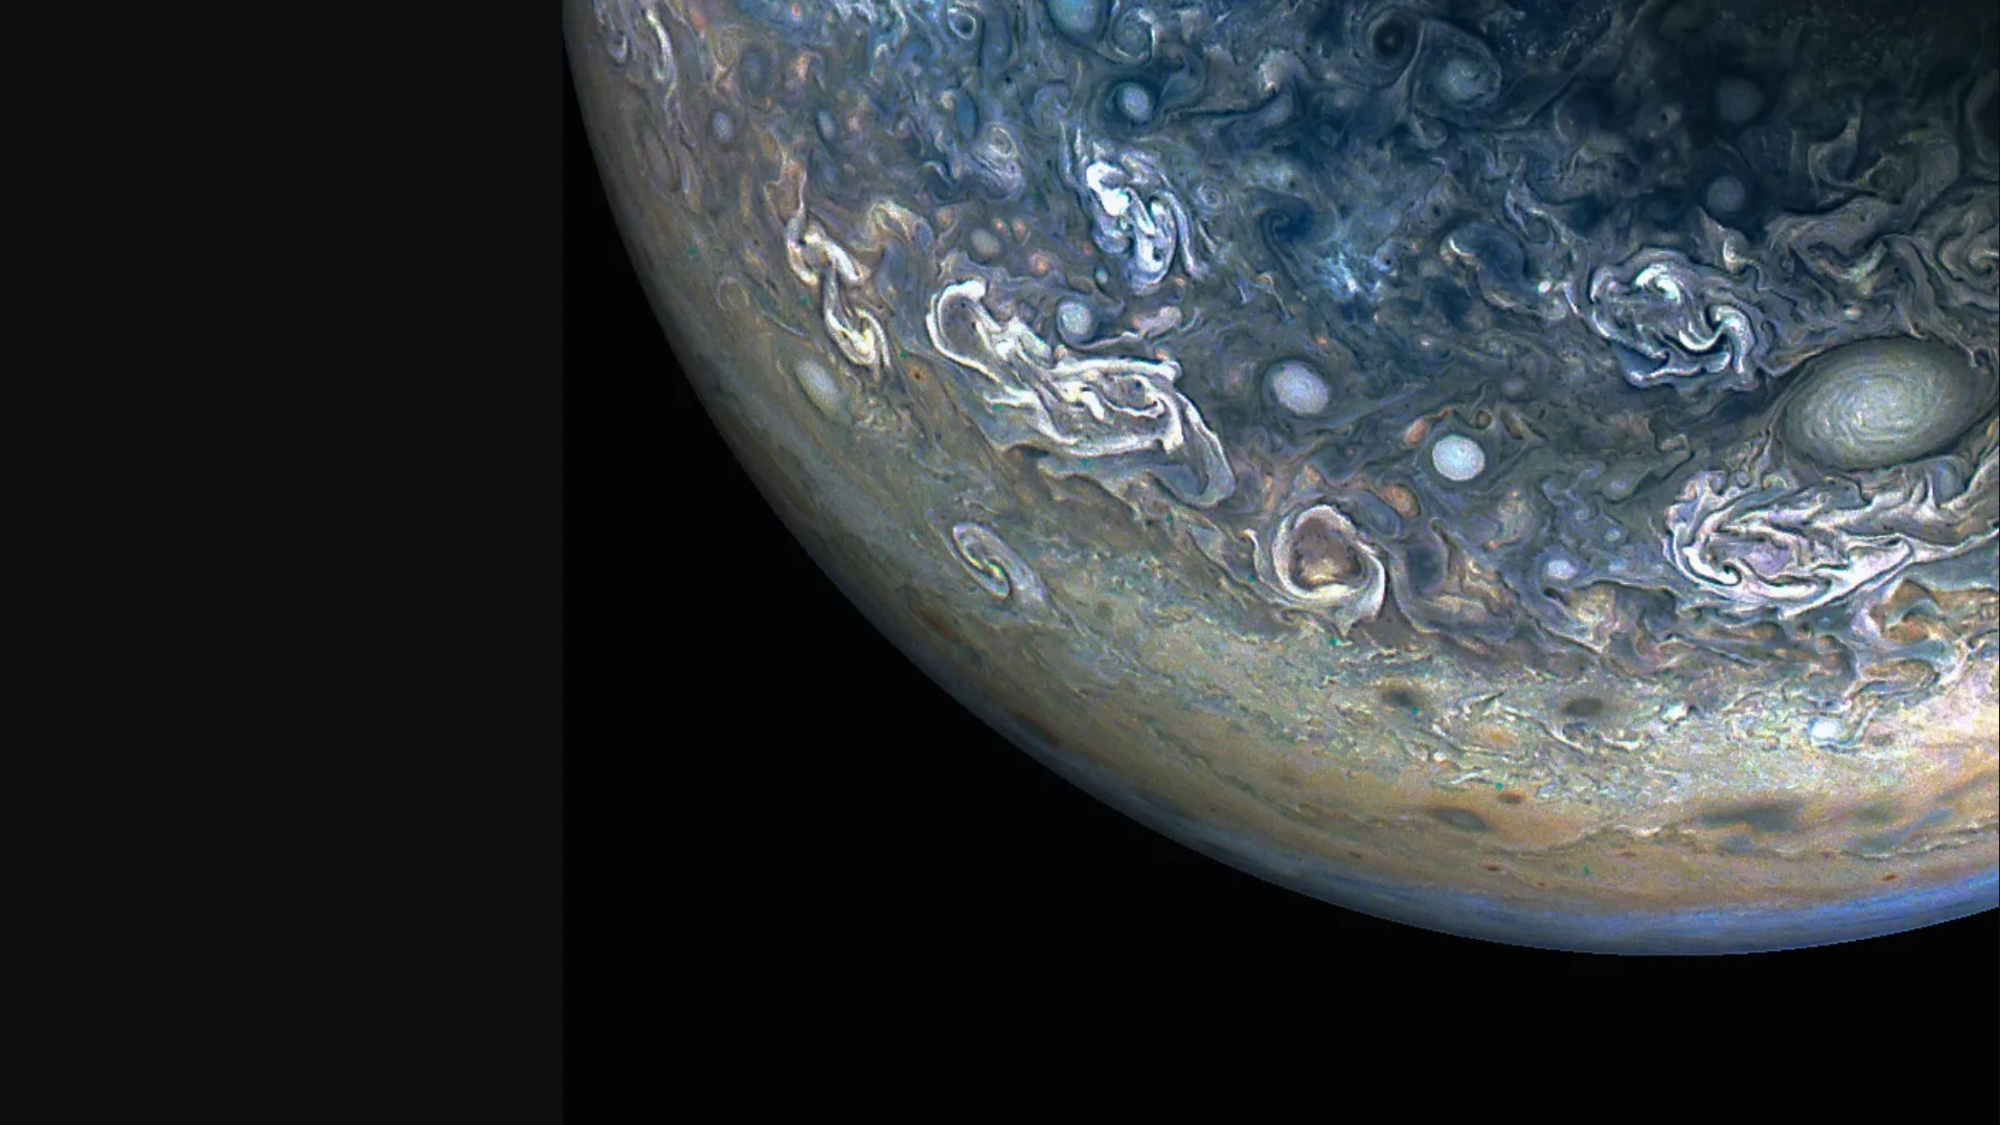  Jupiter's surreal clouds swirl in new van Gogh-esque view from NASA's Juno probe (photo) 